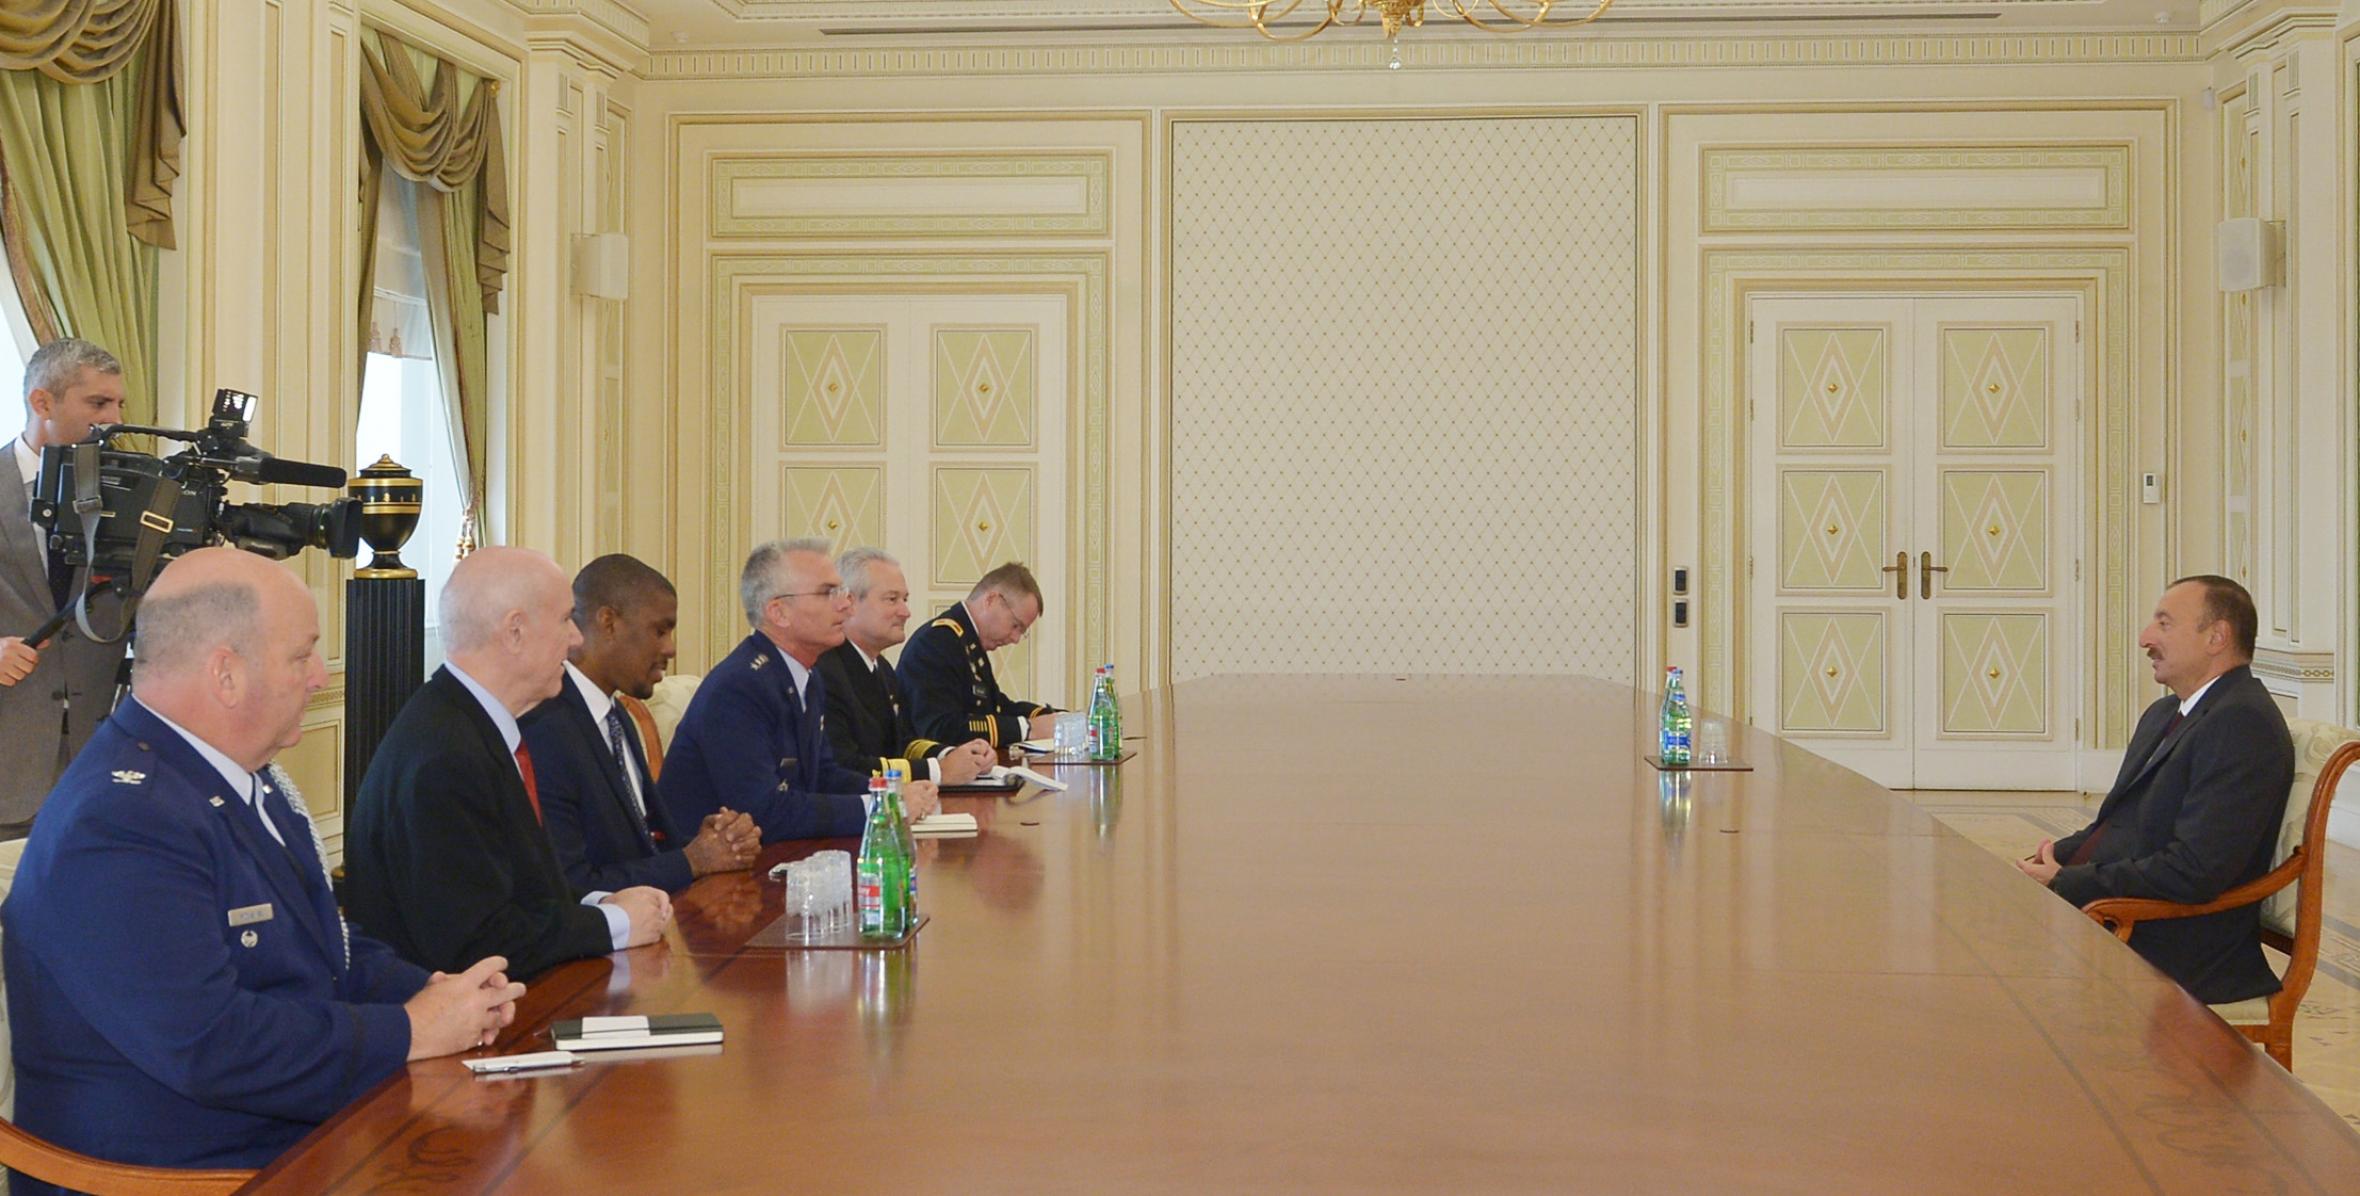 Ilham Aliyev received a delegation led by the Commander of the United States Transportation Command